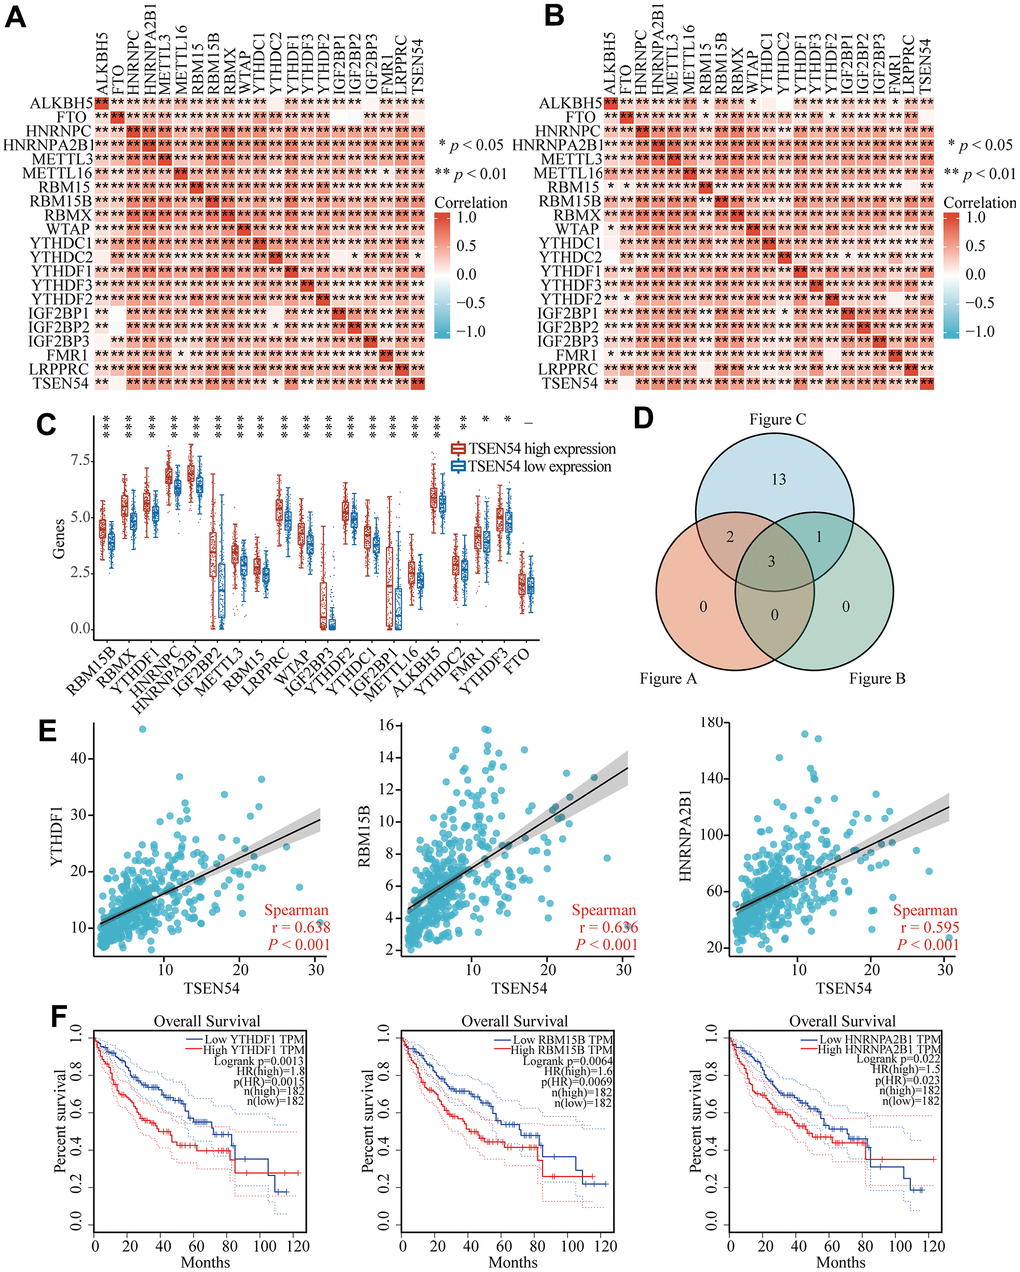 TSEN54 may be relevant to m6A modification in HCC. Heatmaps illustrate the association between TSEN54 and regulators relevant to m6A by (A) TCGA and (B) ICGC databases in HCC. (C) The linkage between high and low expression of TSEN54 and the m6A-related regulators in HCC. (D) Regulators with expression correlation greater than 0.55 and exhibiting meaningful differential expression are shown by the Venn plot. (E) The correlation scatter plots between TSEN54 and 3 regulators in the cross set, including YTHDF1, RBM15B and HNRNPA2B1. (F) Survival curves of YTHDF1, RBM15B and HNRNPA2B1 in HCC.